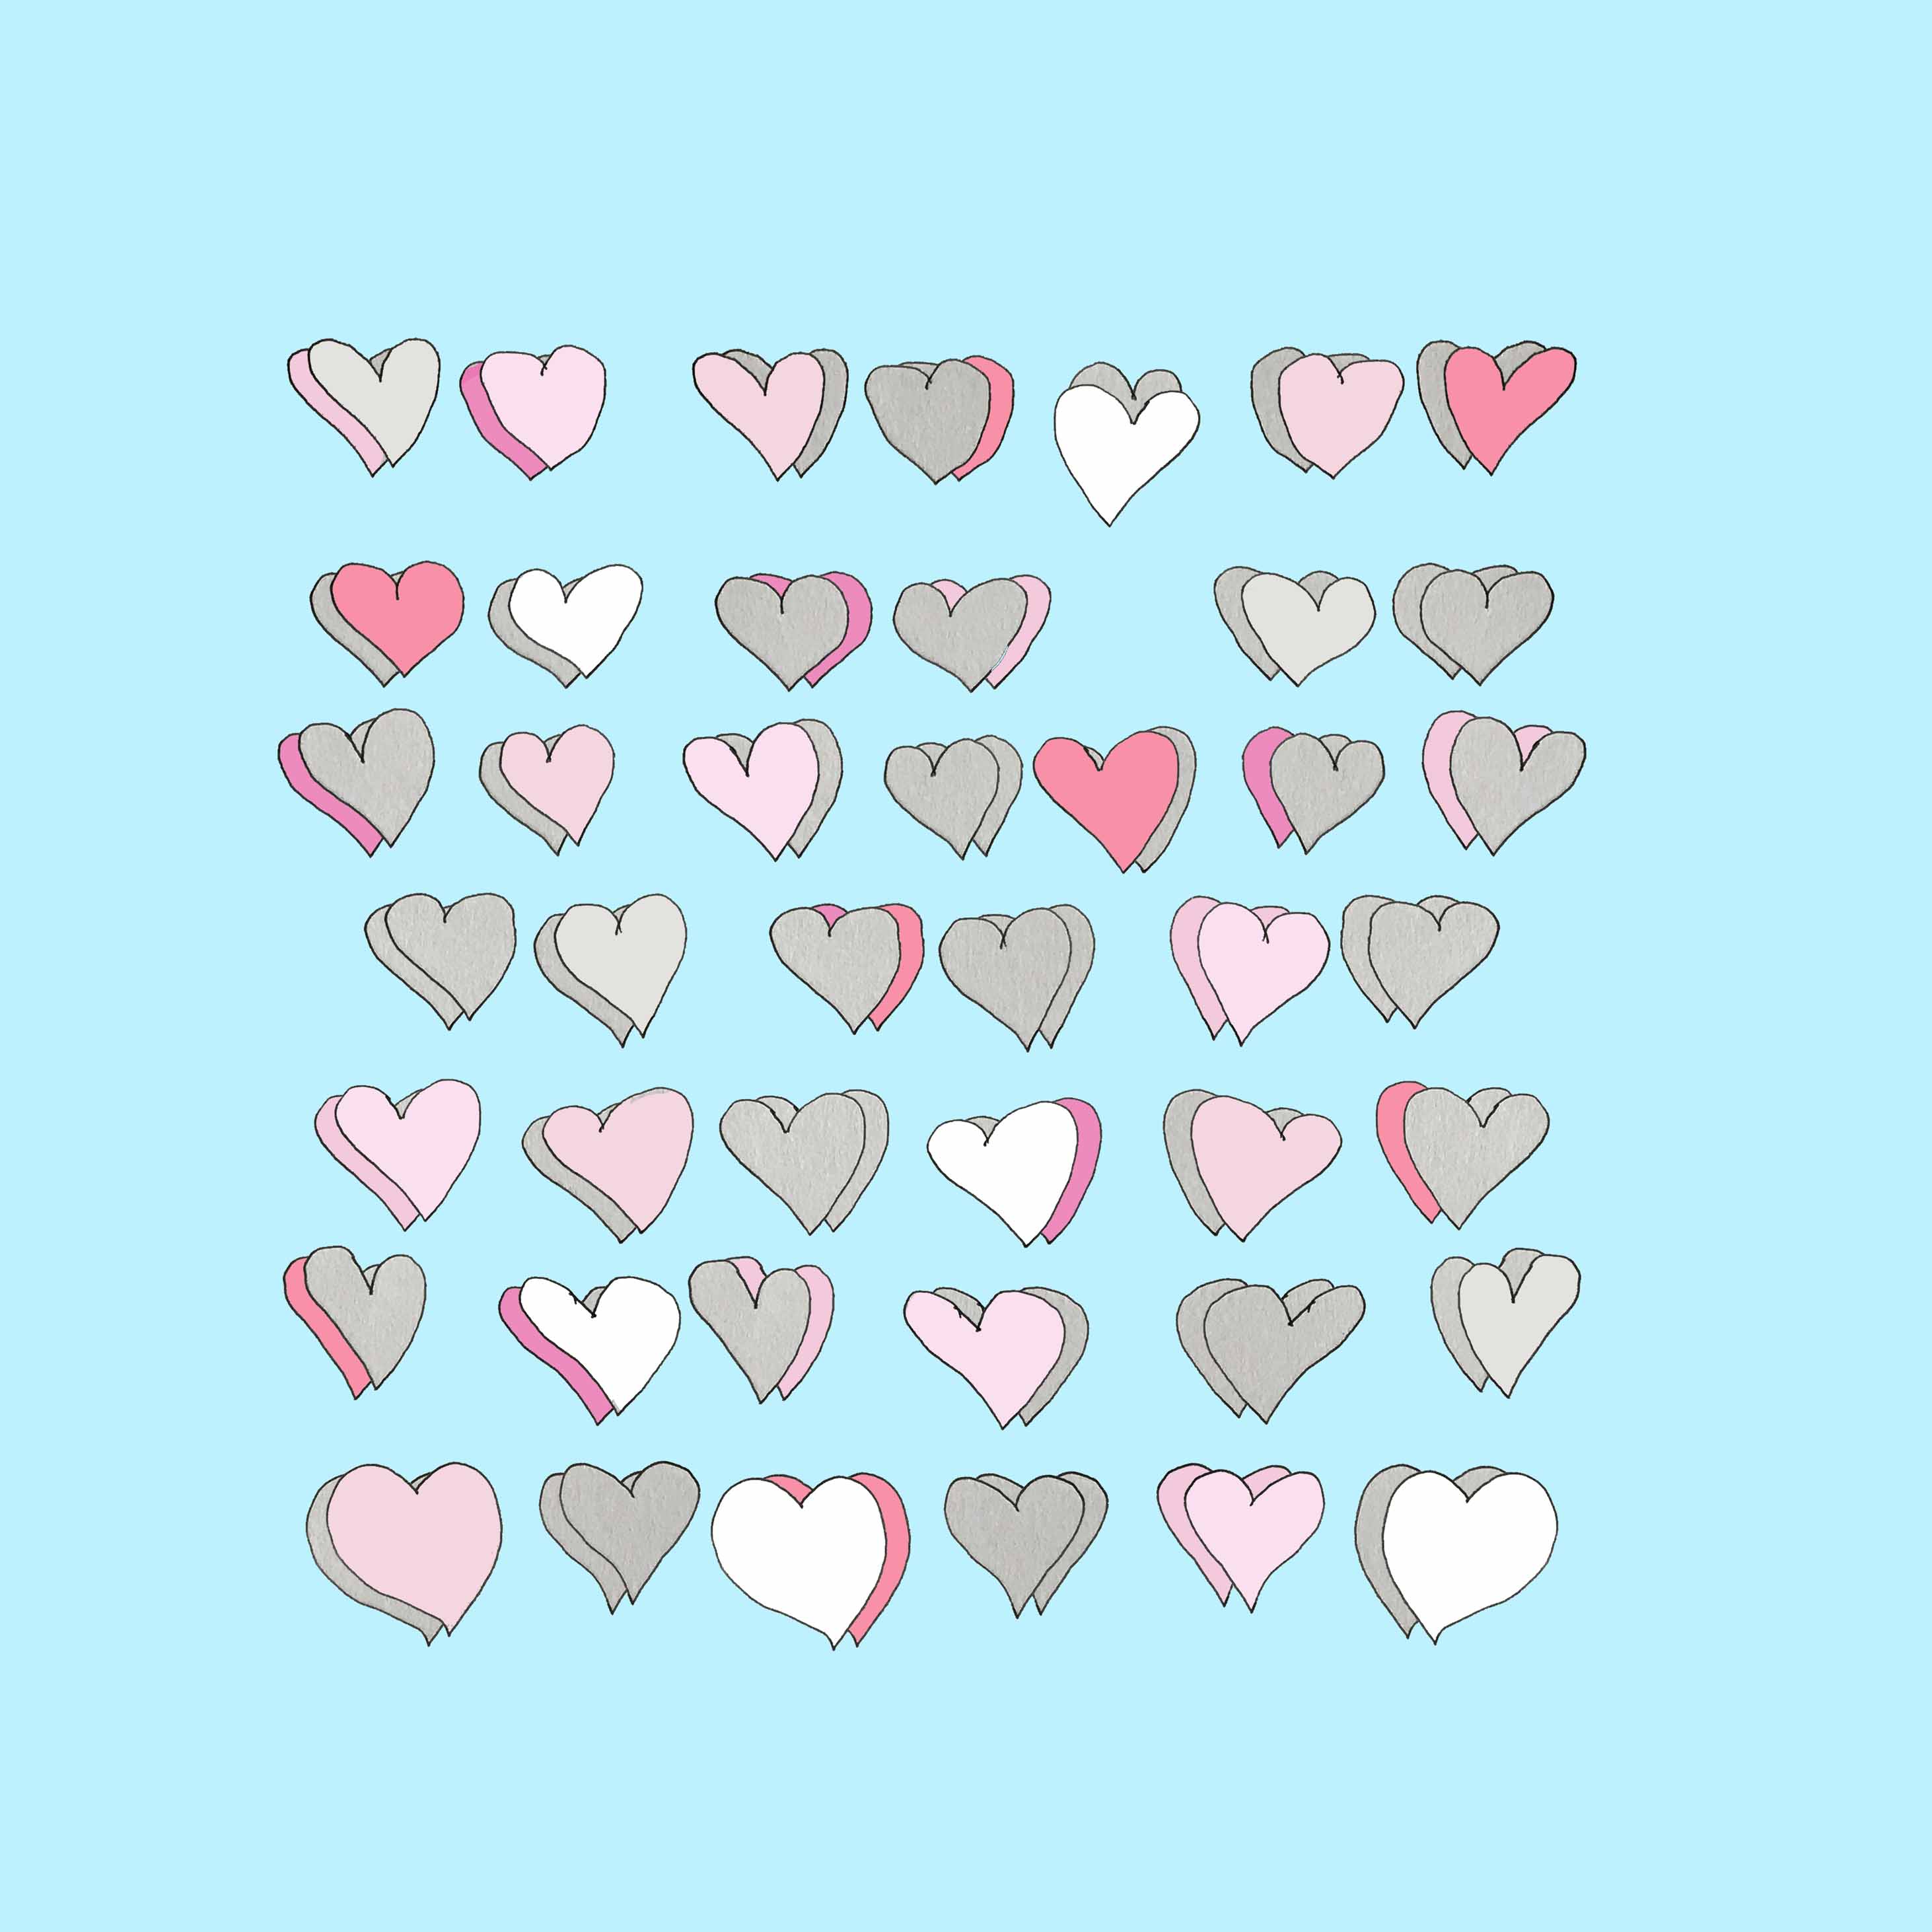 art every day number 236 / illustration / paper hearts